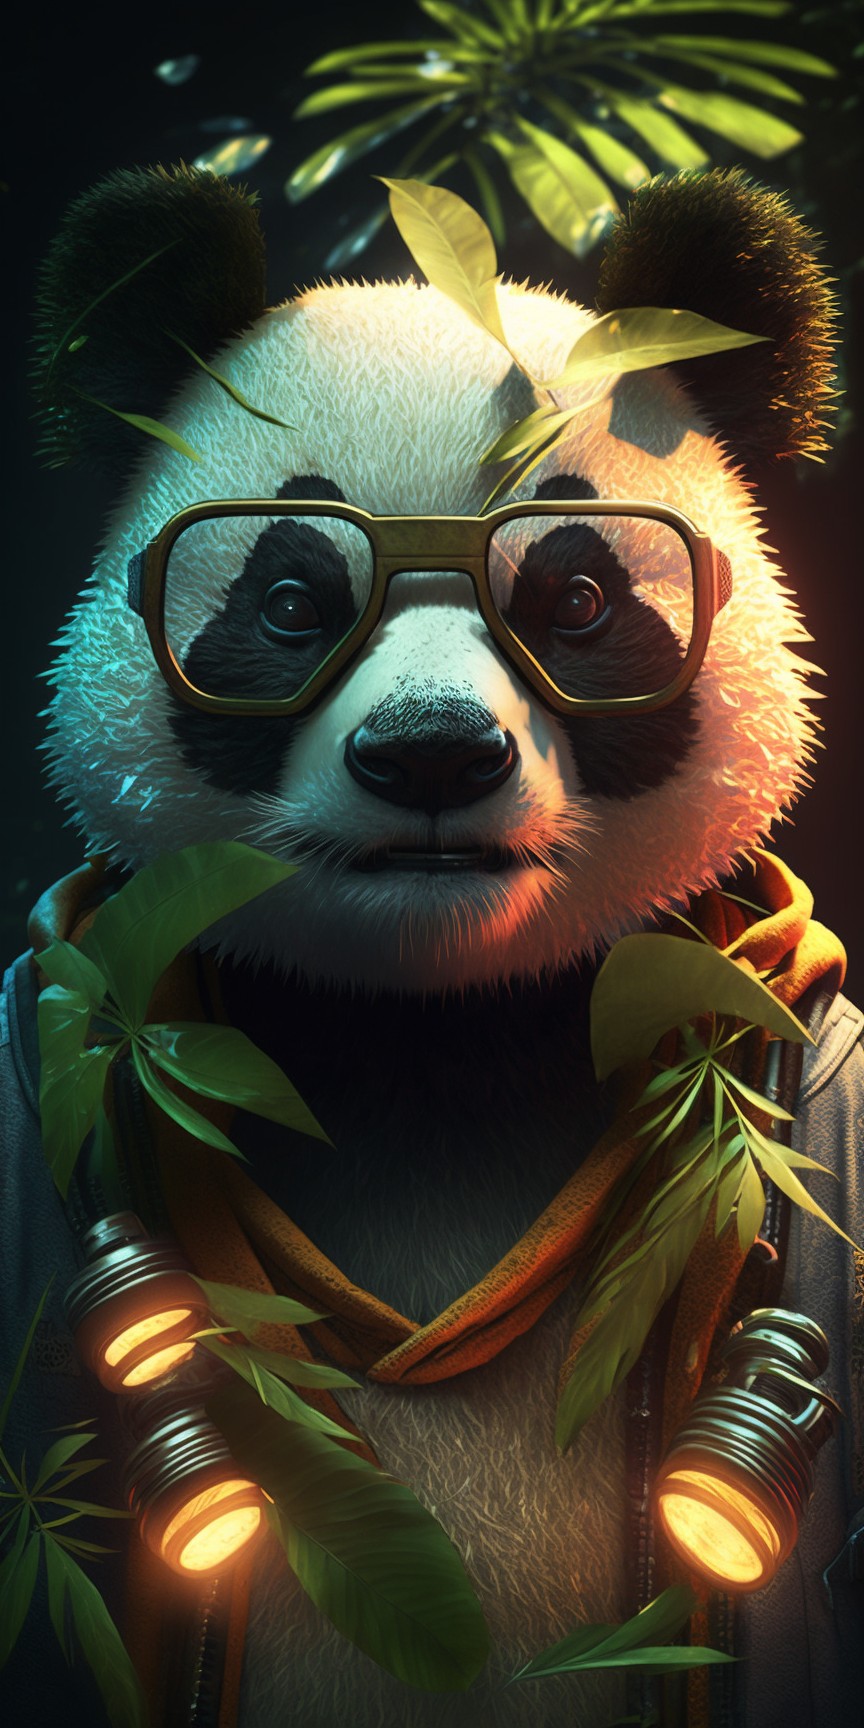 8 images of cool panda dad by Midjourney